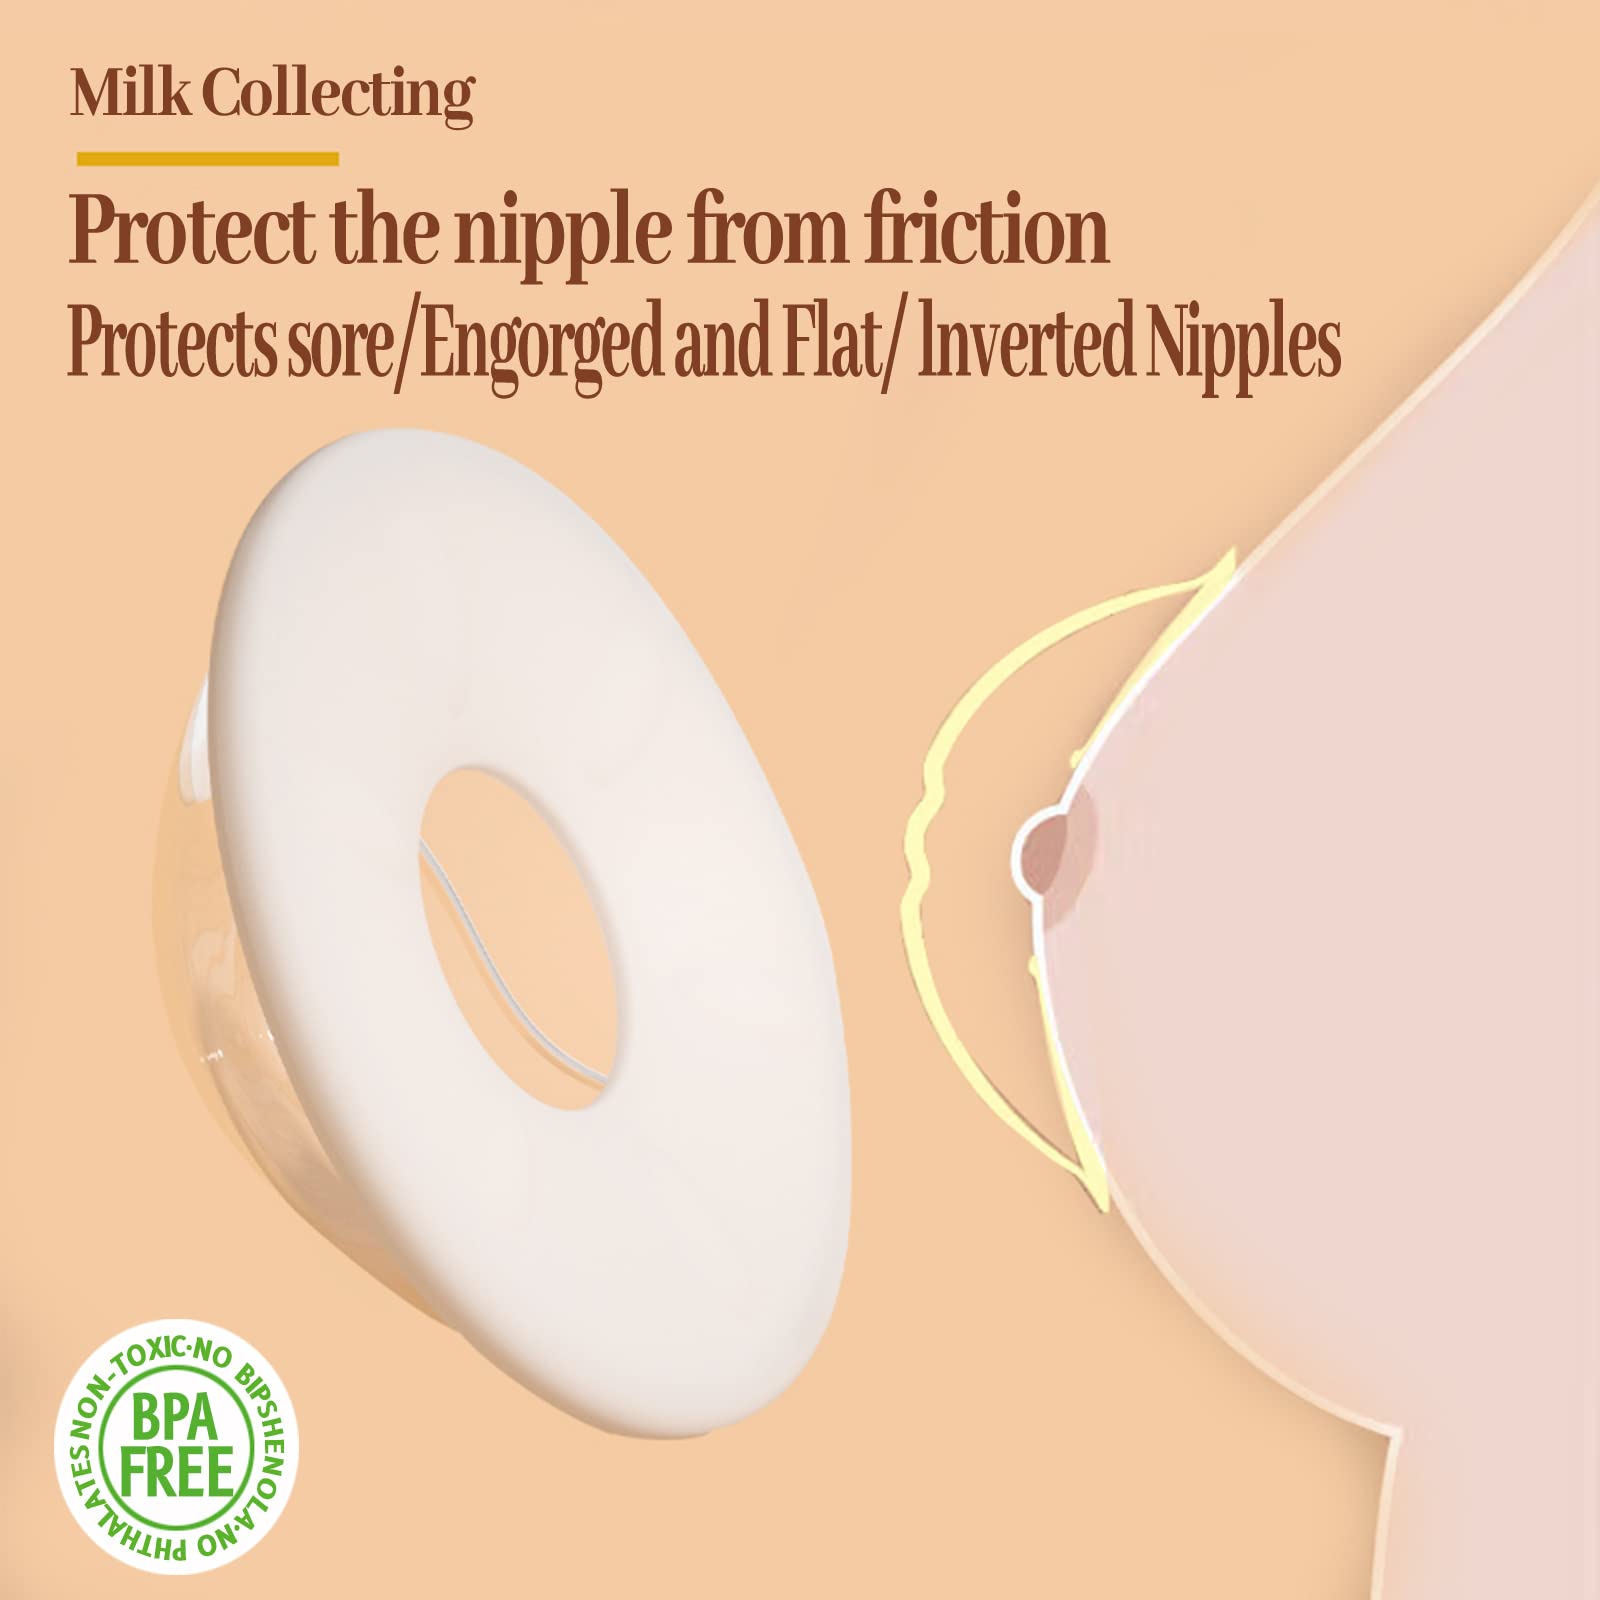 Bliblo Breast Shells for Sore Nipple and Breast Feeding, Nursing Cup（2 Packs）,Milk Saver, No More Wasted Milk or Wasteful Breast Pads, PBA Free.